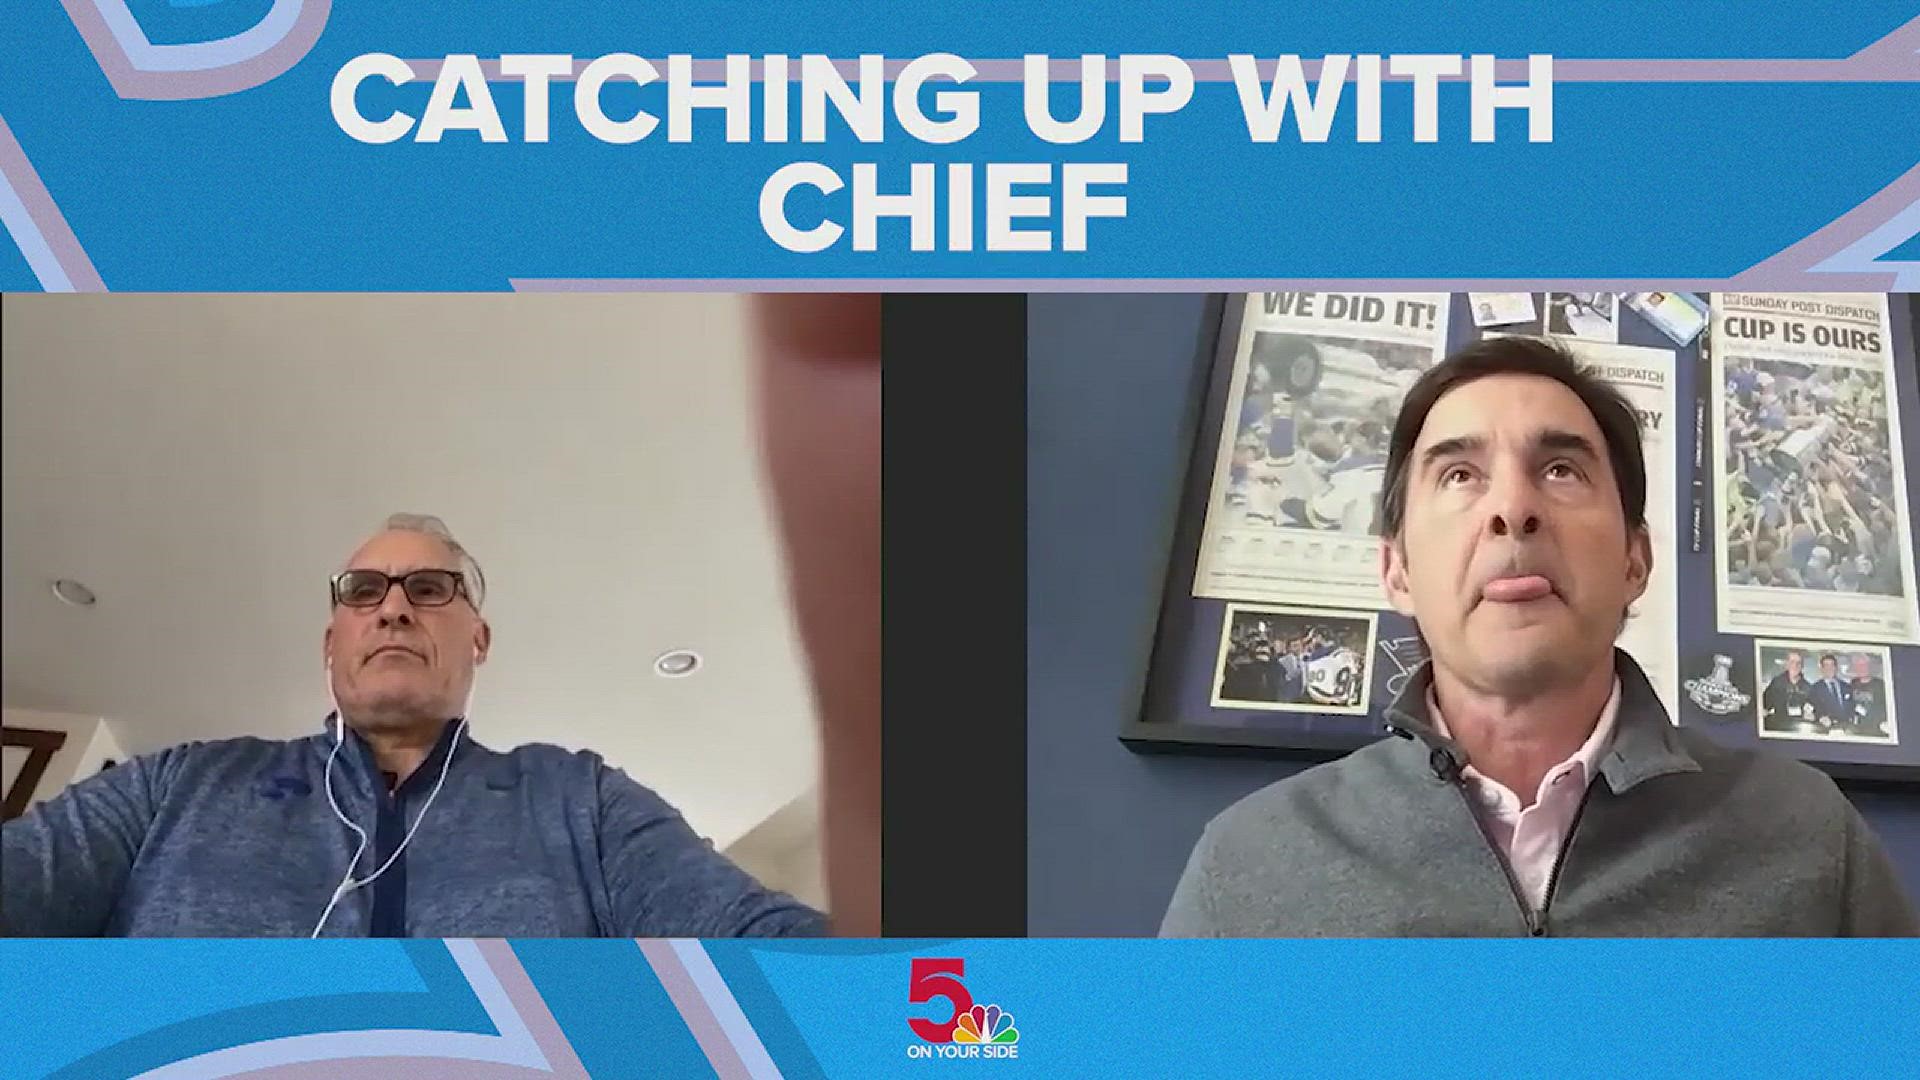 5 On Your Side sports director Frank Cusumano caught up with "Chief".